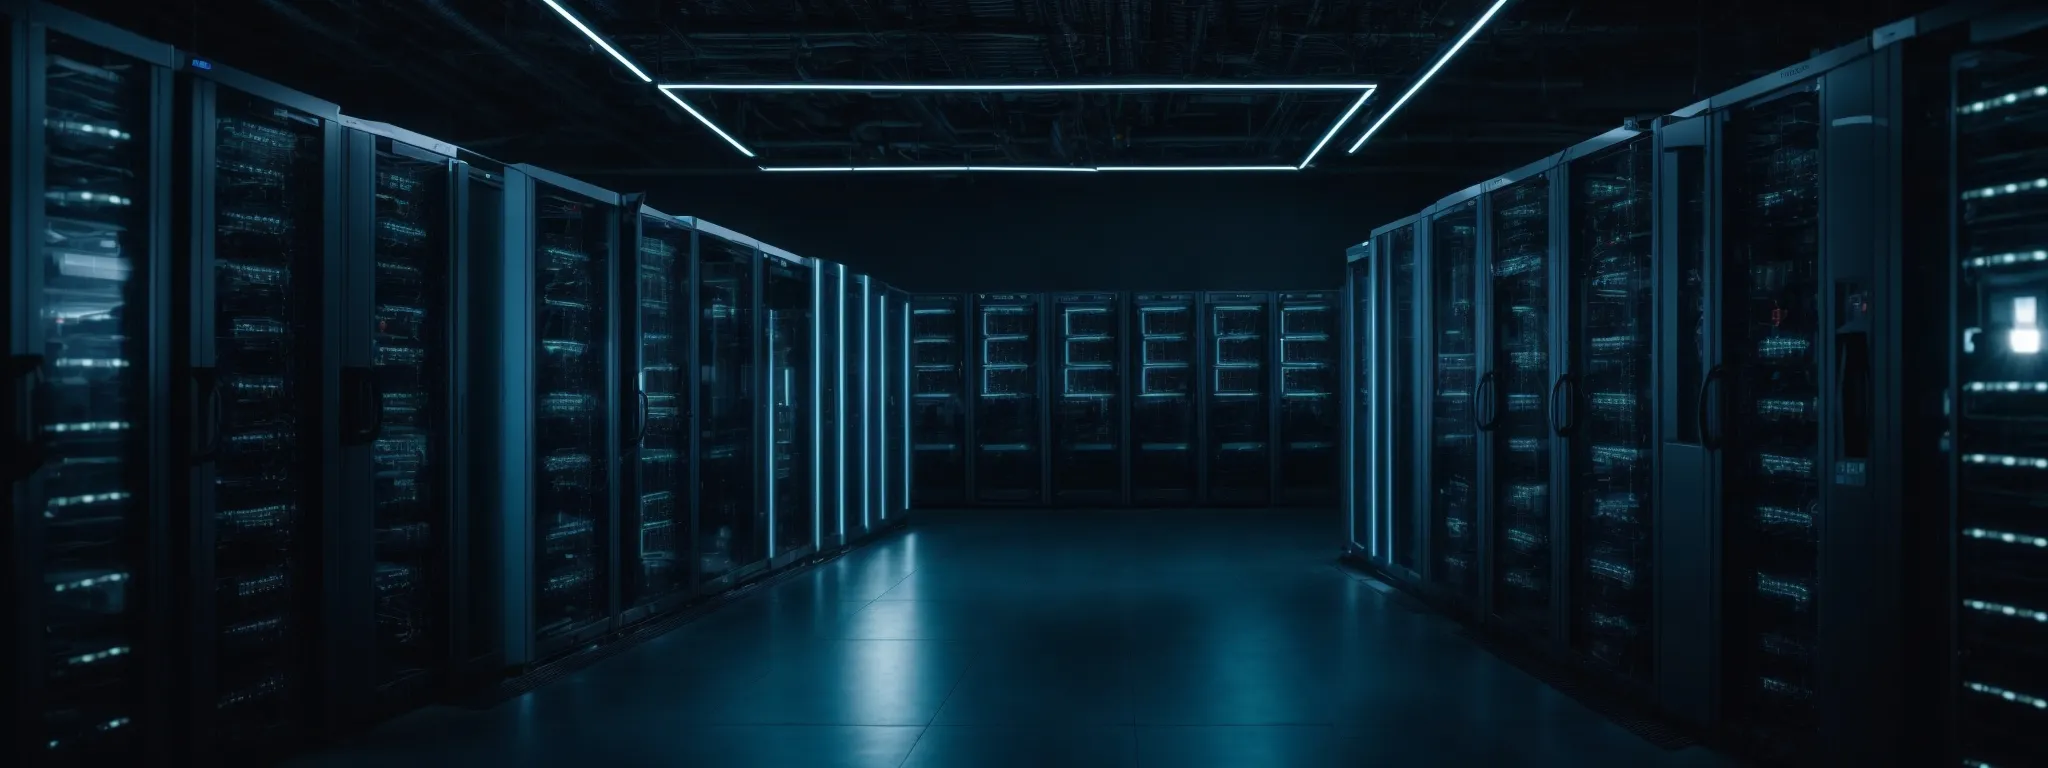 a secure server room with rows of computers and flashing lights indicating active data protection for seo rank tracking.